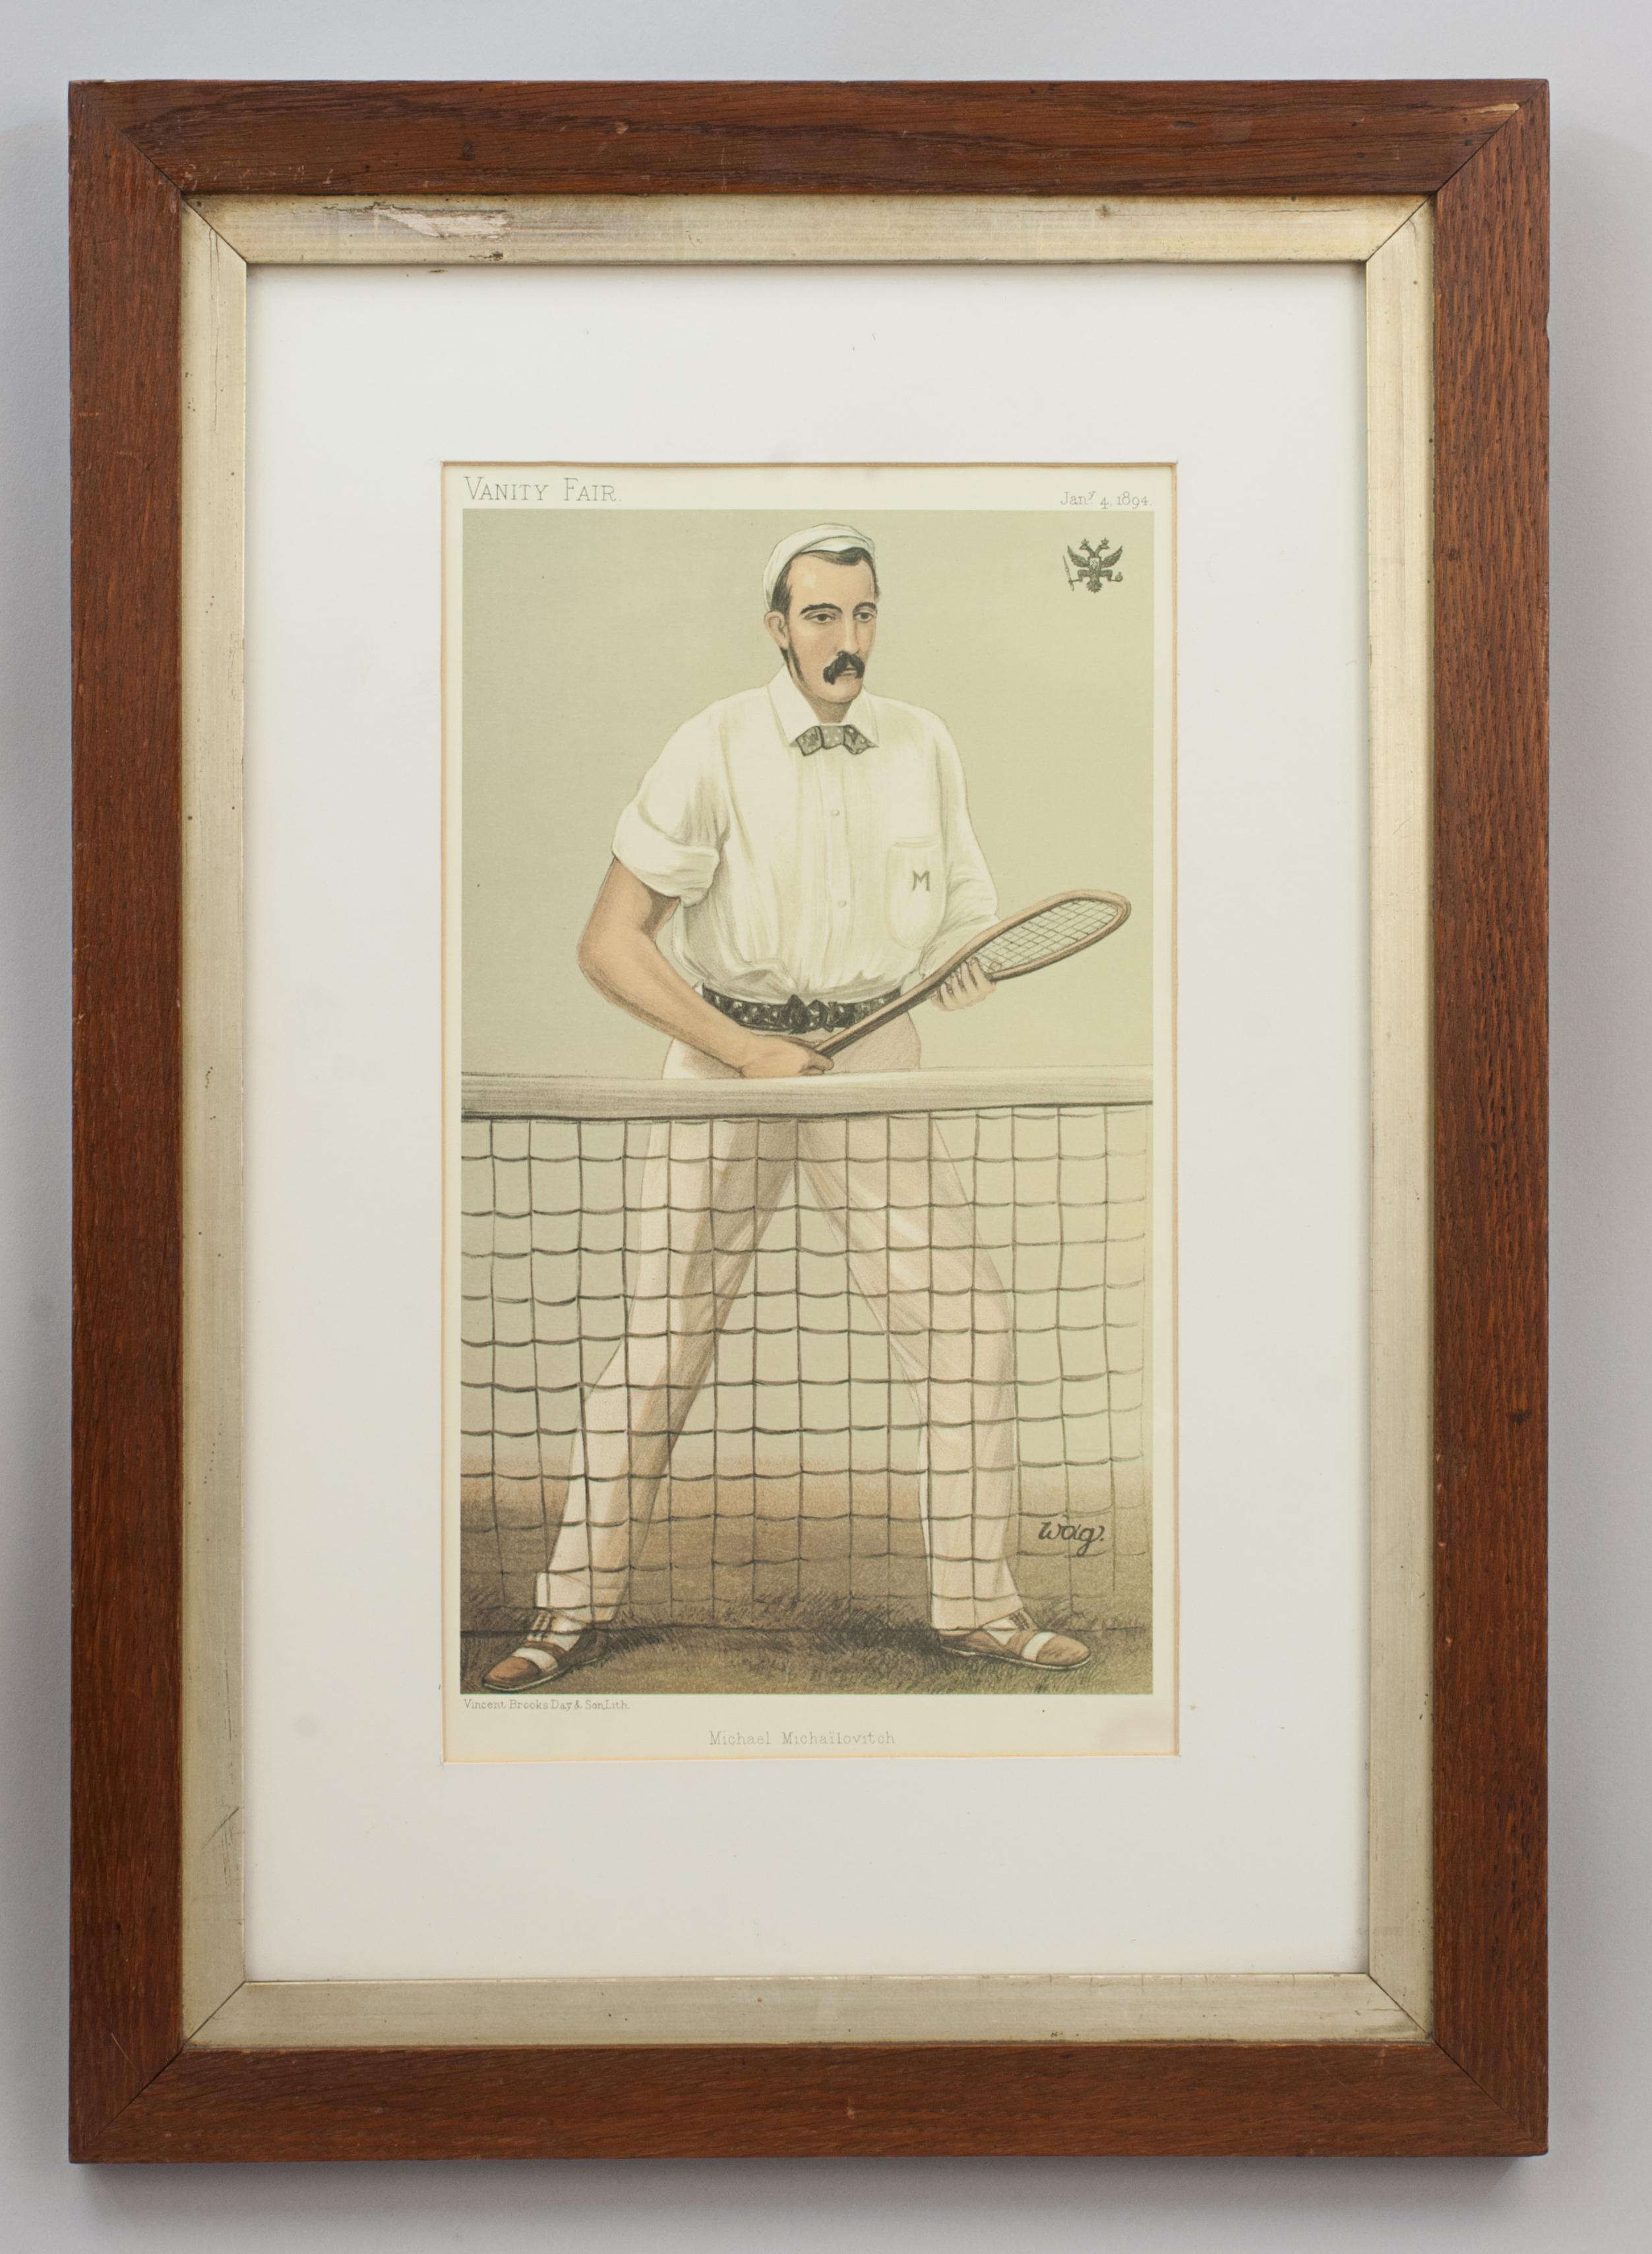 Vanity Fair Lawn Tennis, Michael Michailovitch, Grand Duke of Russia.
A chromolithograph tennis print published 4th Jan, 1894, by Vincent Brooks, Day & Son Ltd. Lith., for Vanity Fair. The picture is titled 'Michael Michailovitch' and is an original